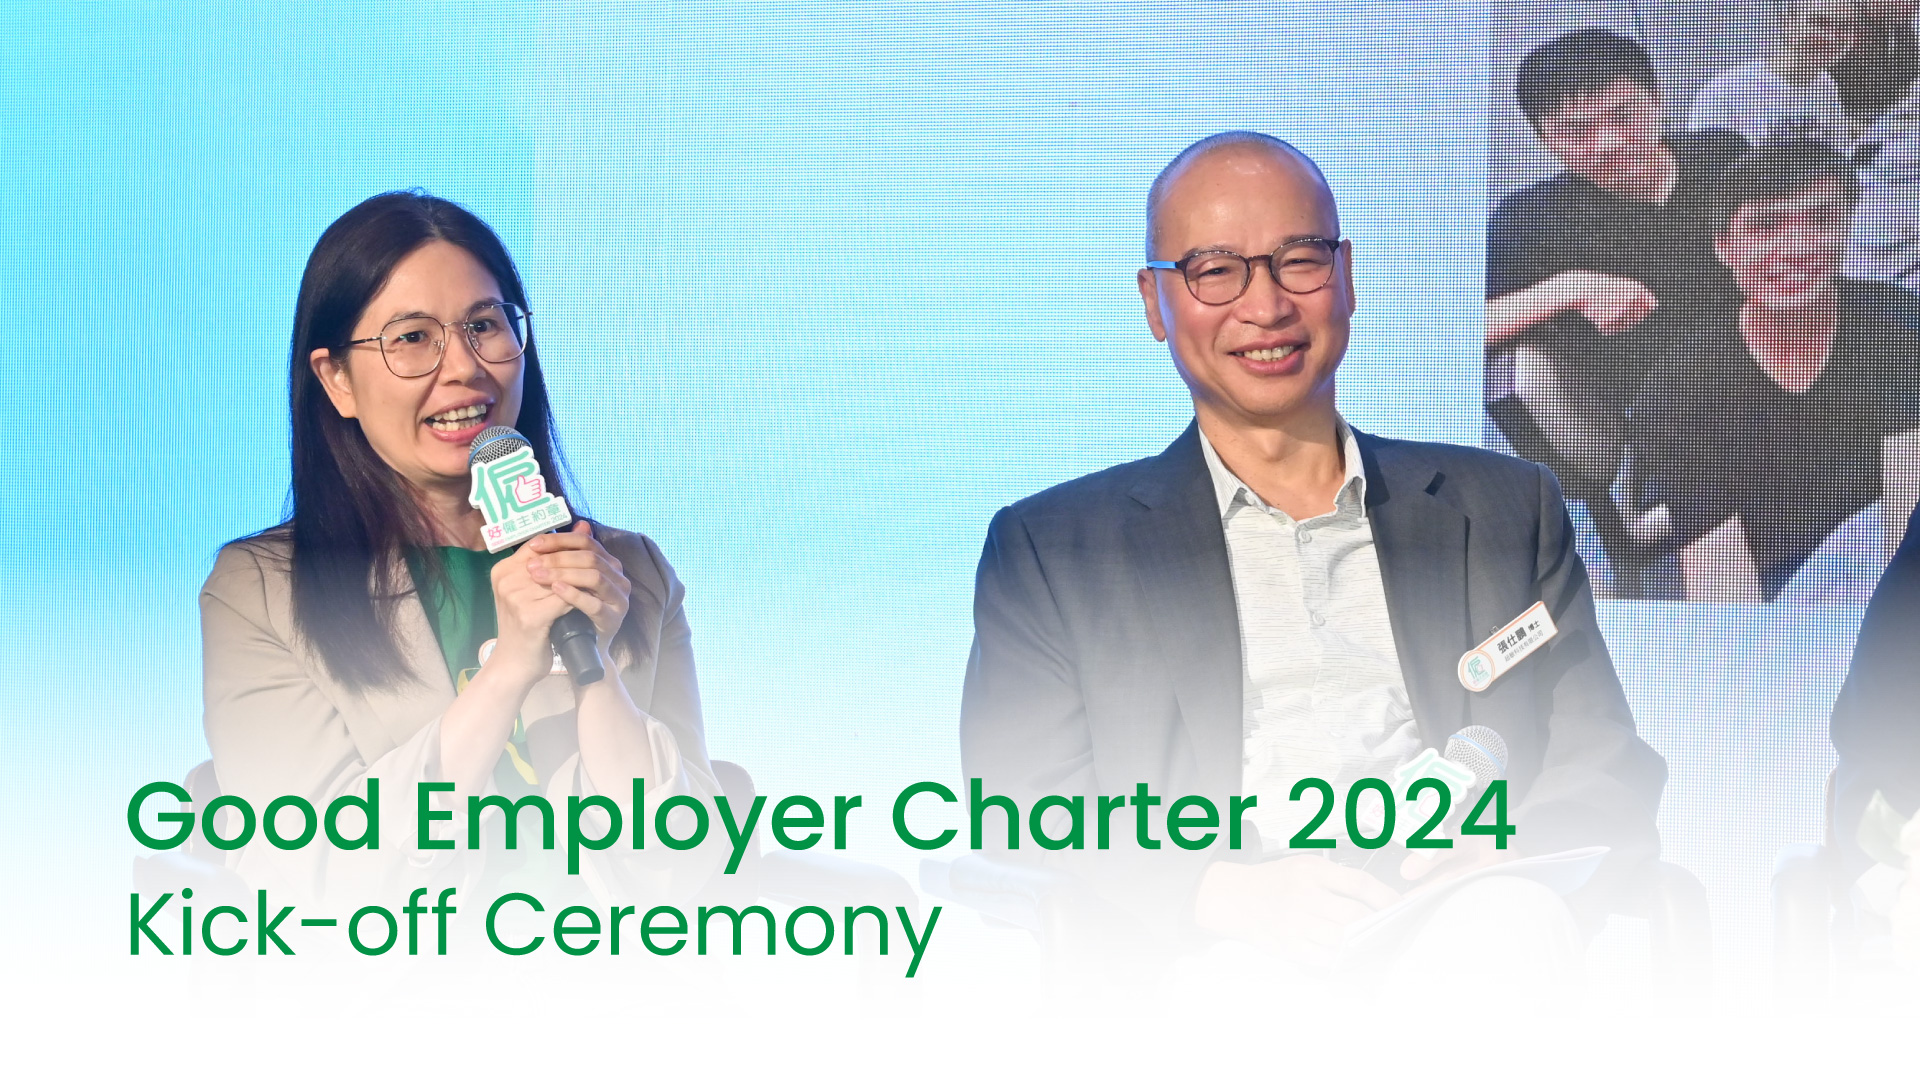 UAT was invited to share experience on “Good Employer Charter 2024 Kick-off Ceremony”